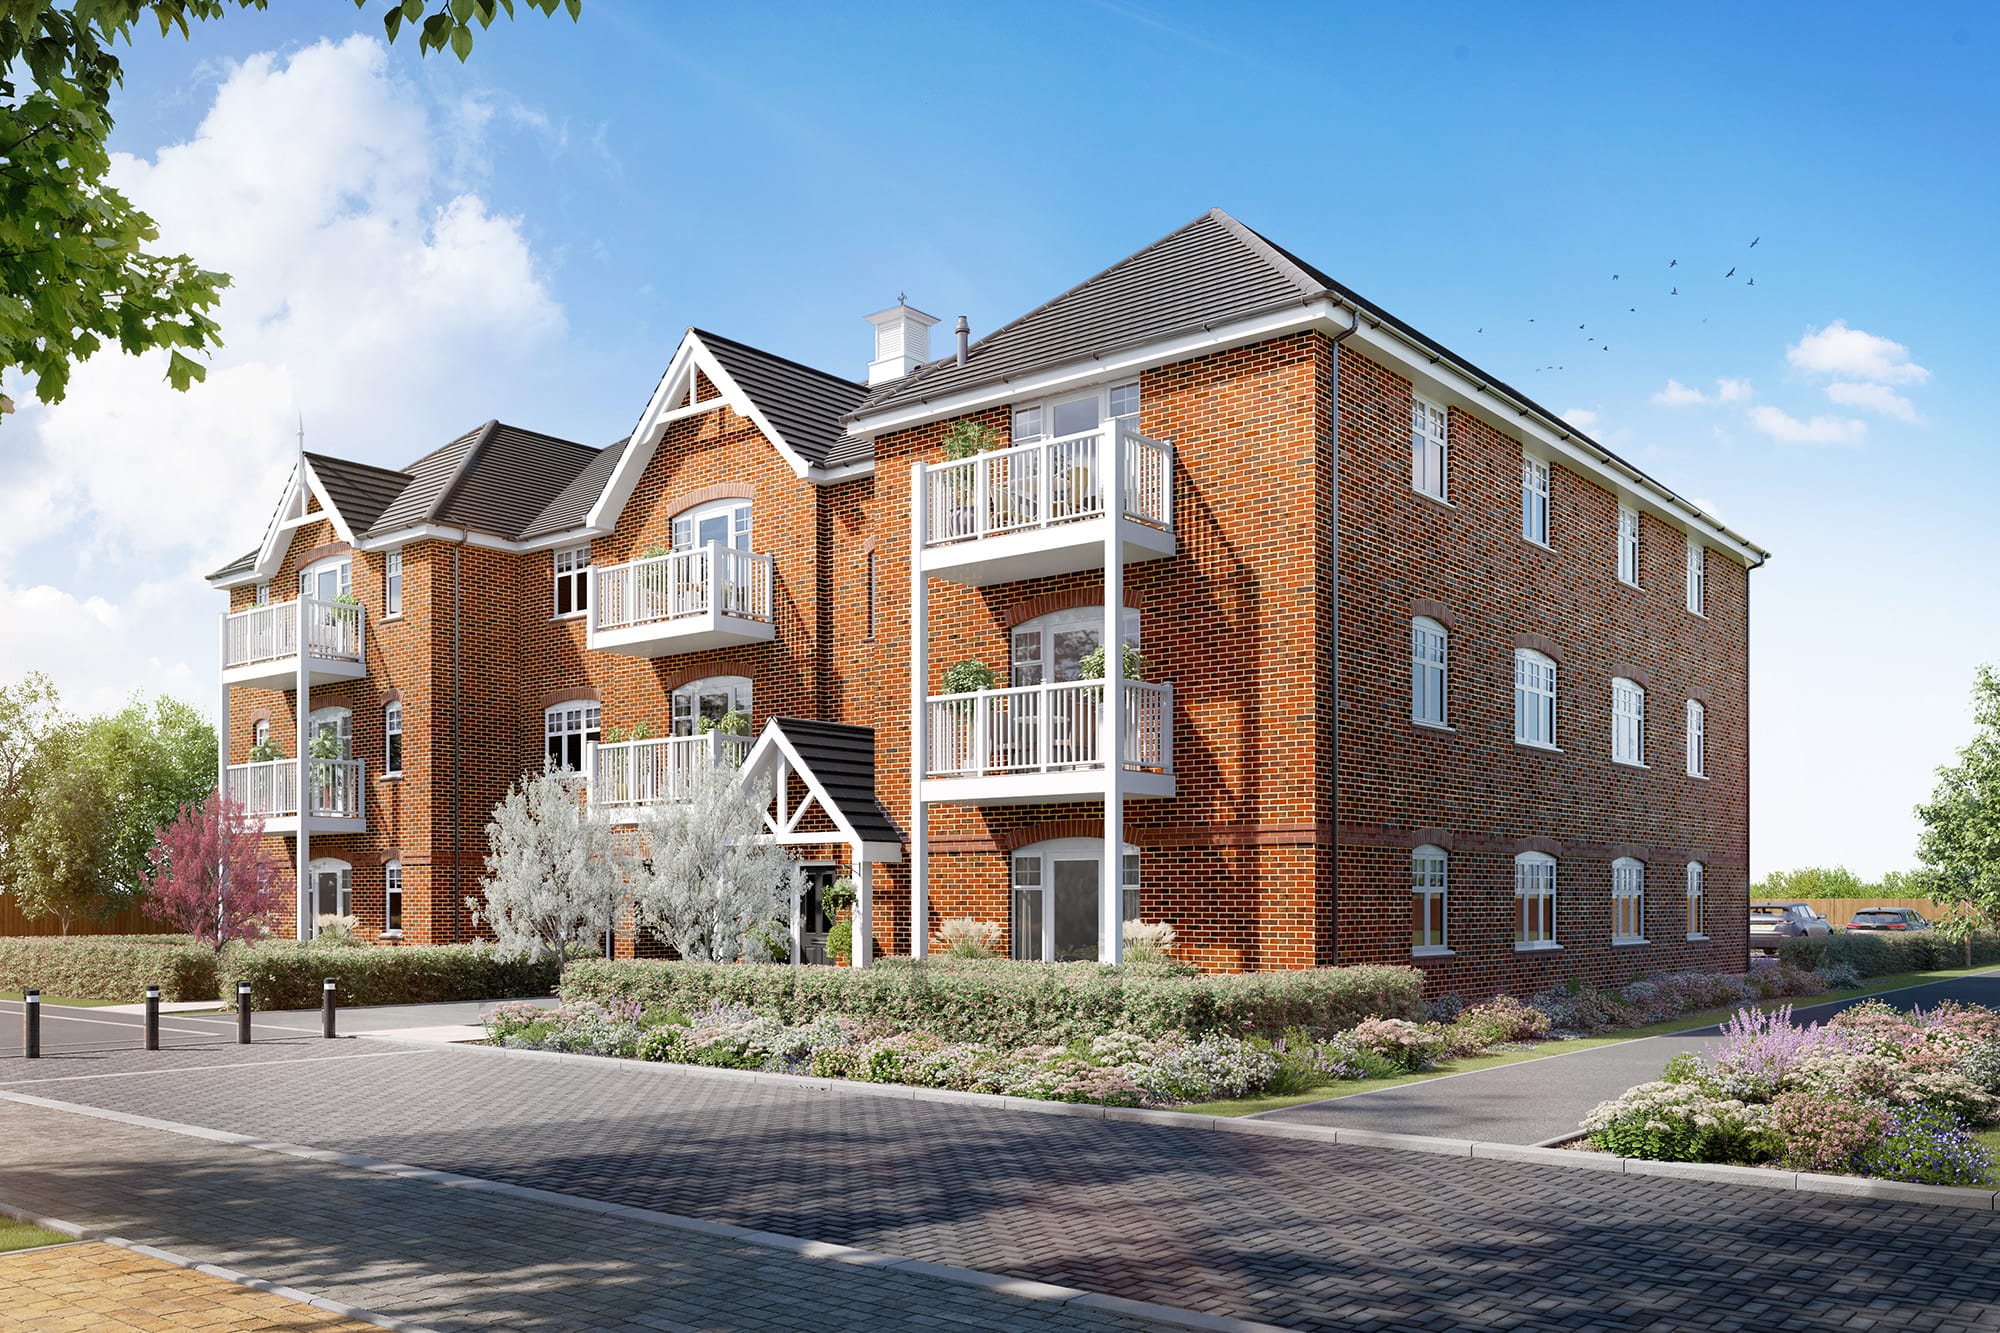 An external CGI image of Sunninghill Square by Abri Homes - available to purchase through Shared Ownership on Share to Buy!